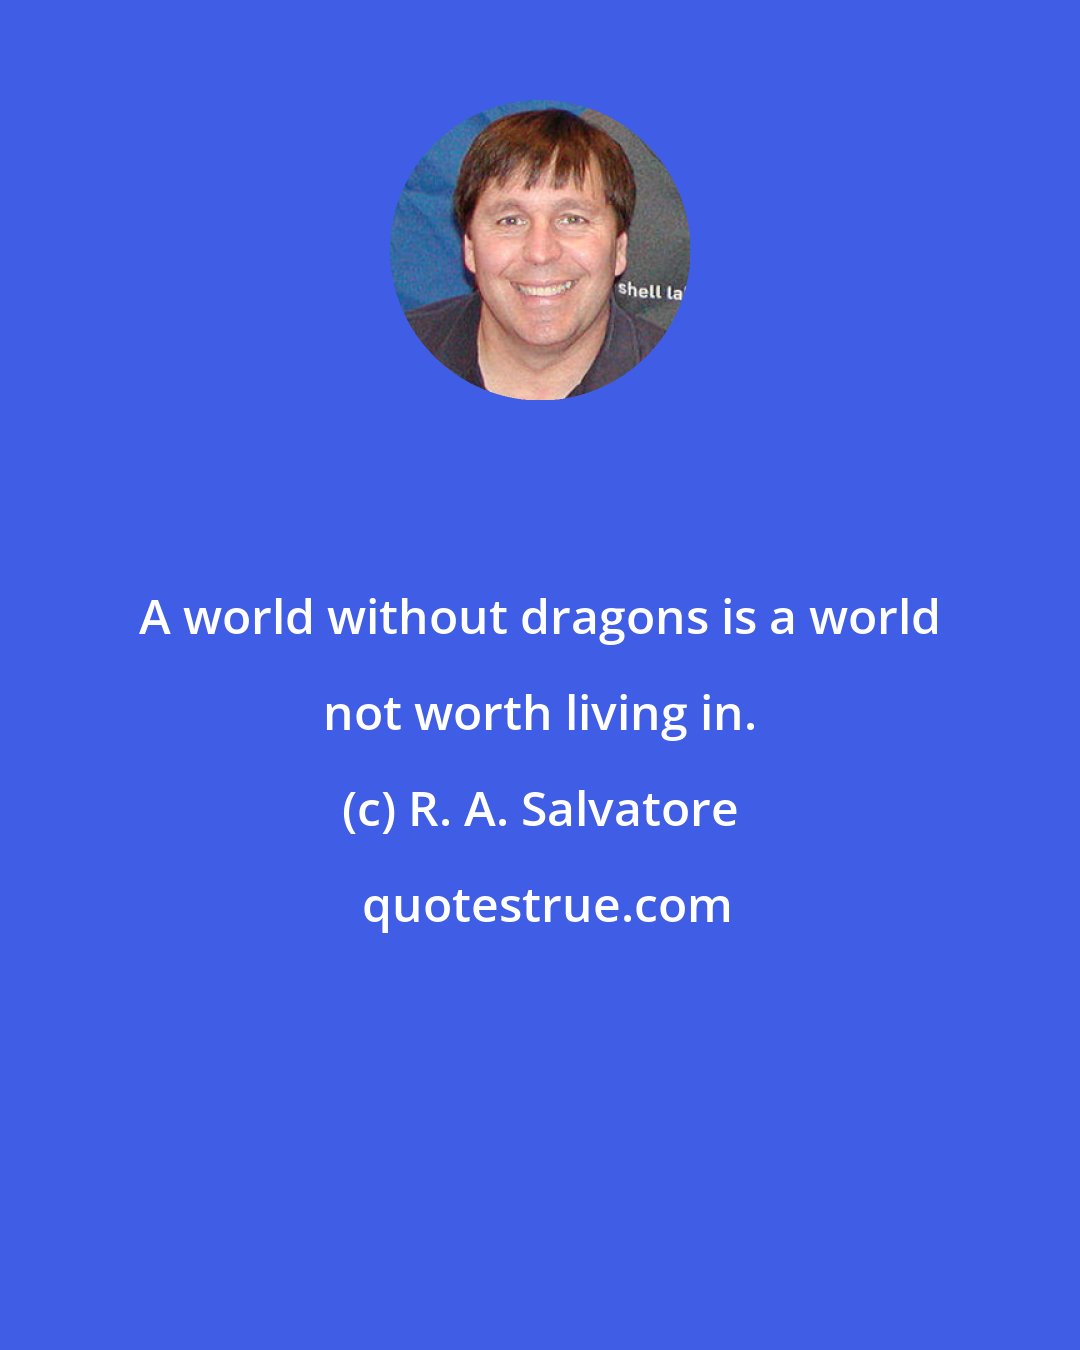 R. A. Salvatore: A world without dragons is a world not worth living in.